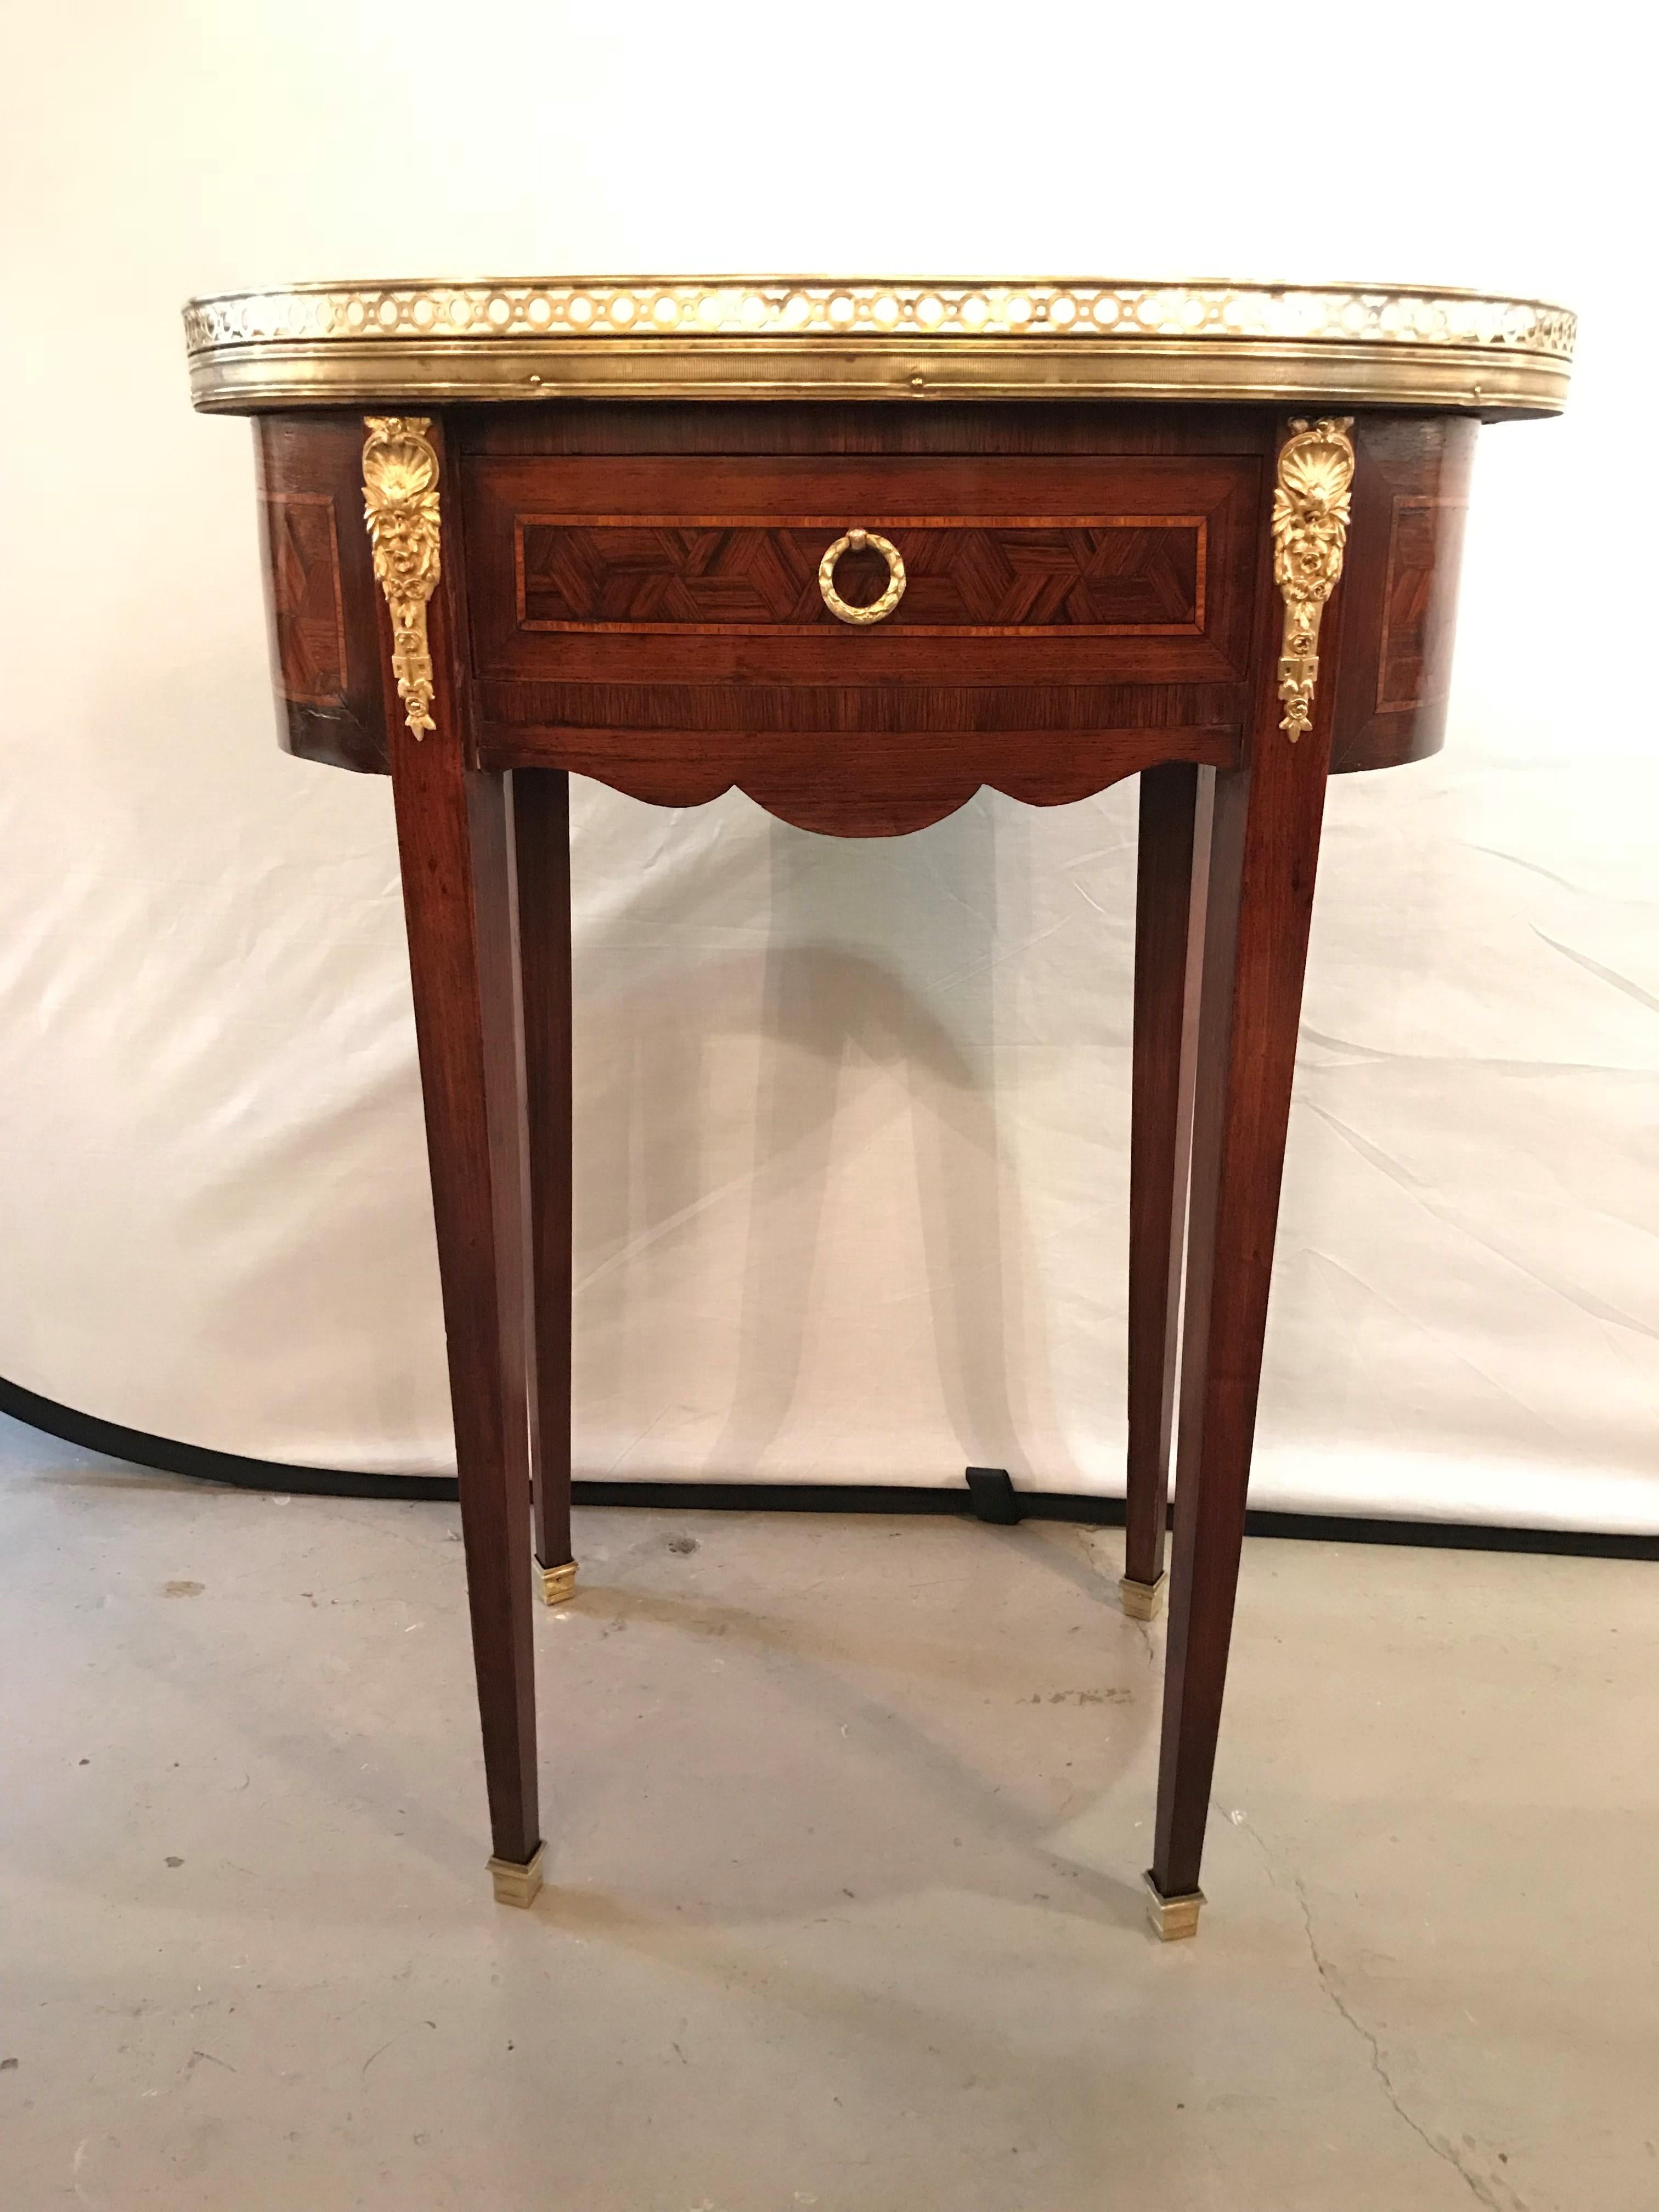 Pair of 19th century parquetry inlaid oval rose veined marble-top end tables or lamp tables. Each having a marble top set in a galleried bronze frame supported by a case of one center drawer with bronze flanked sides and fine inlays. The whole with